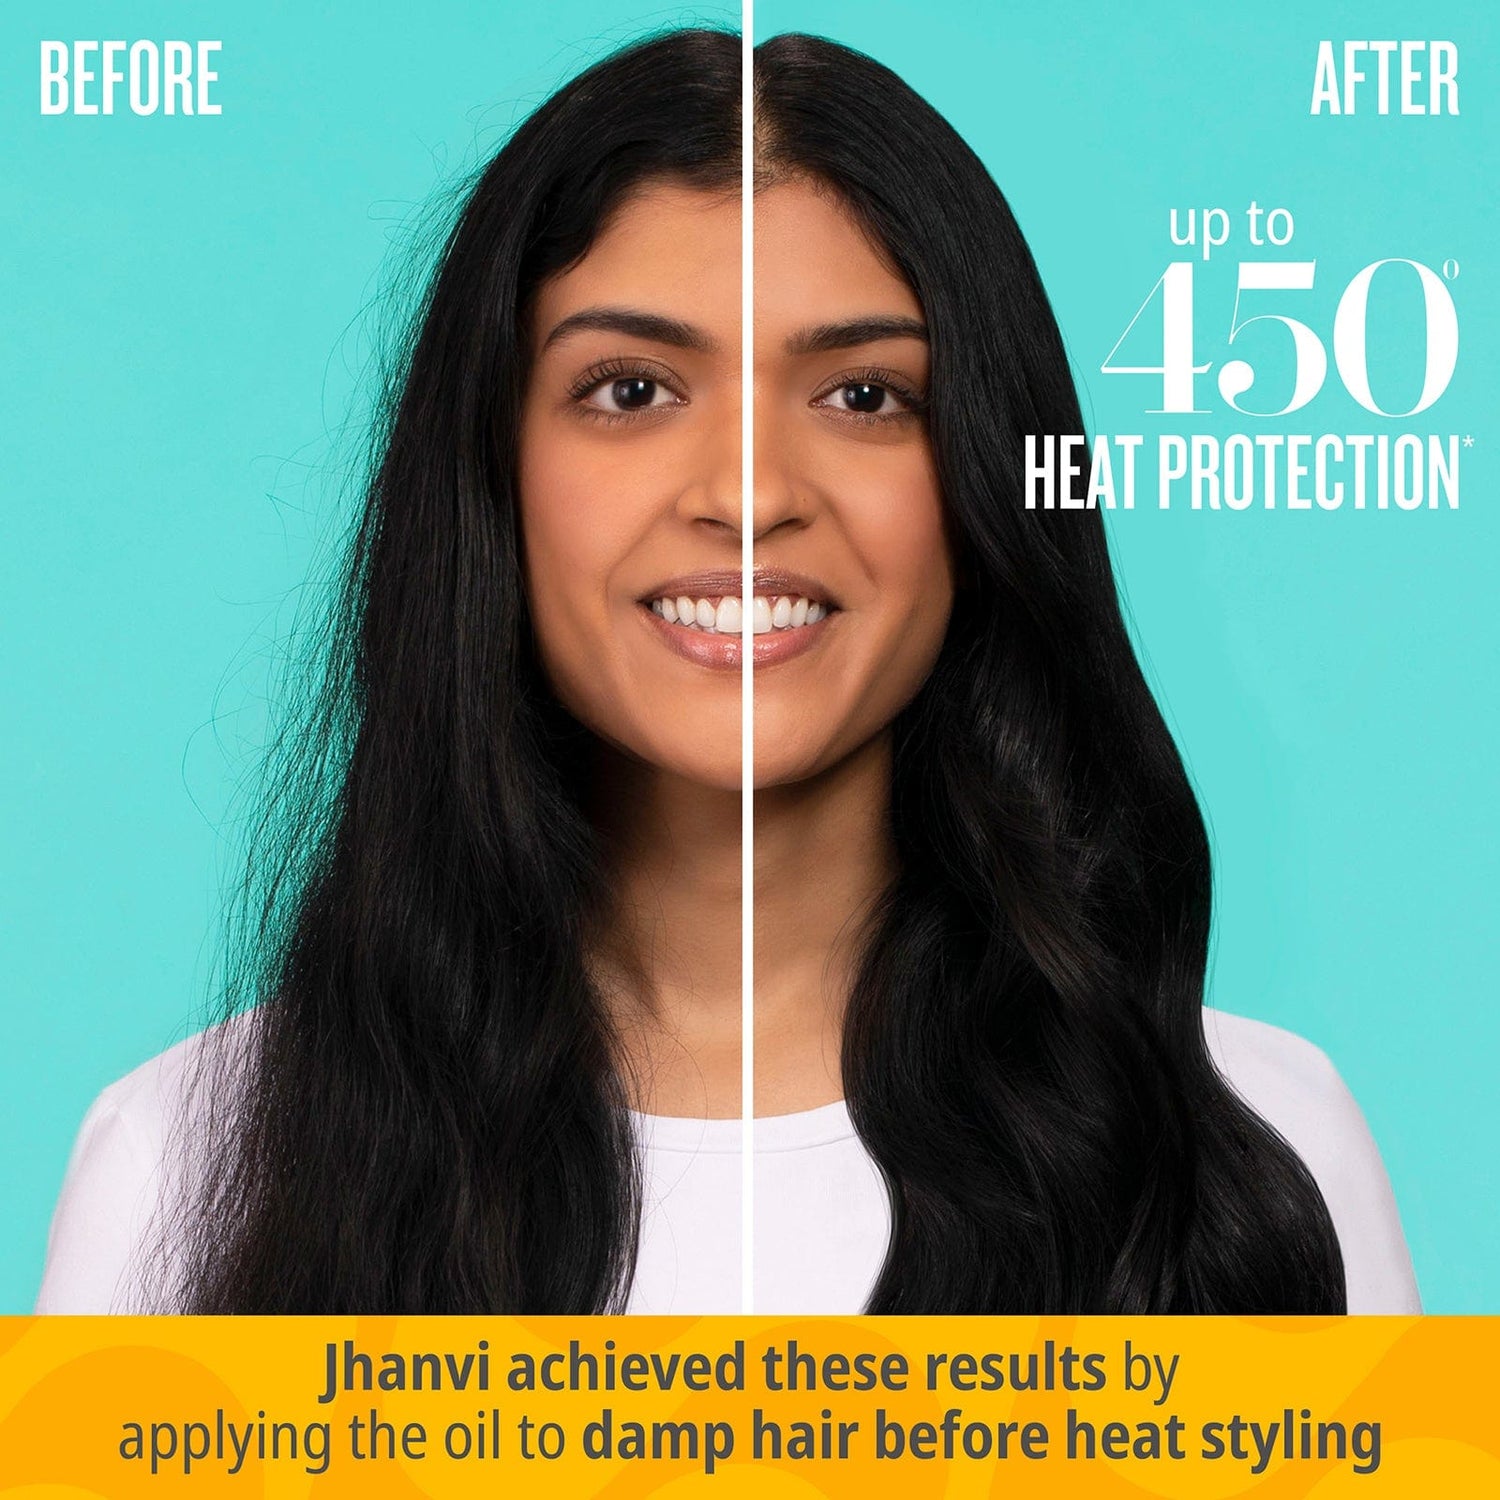 Before | After: up to 450 degree heat protection | Jhanvi achieved these results by applying the oil to her damp hair before heat styling